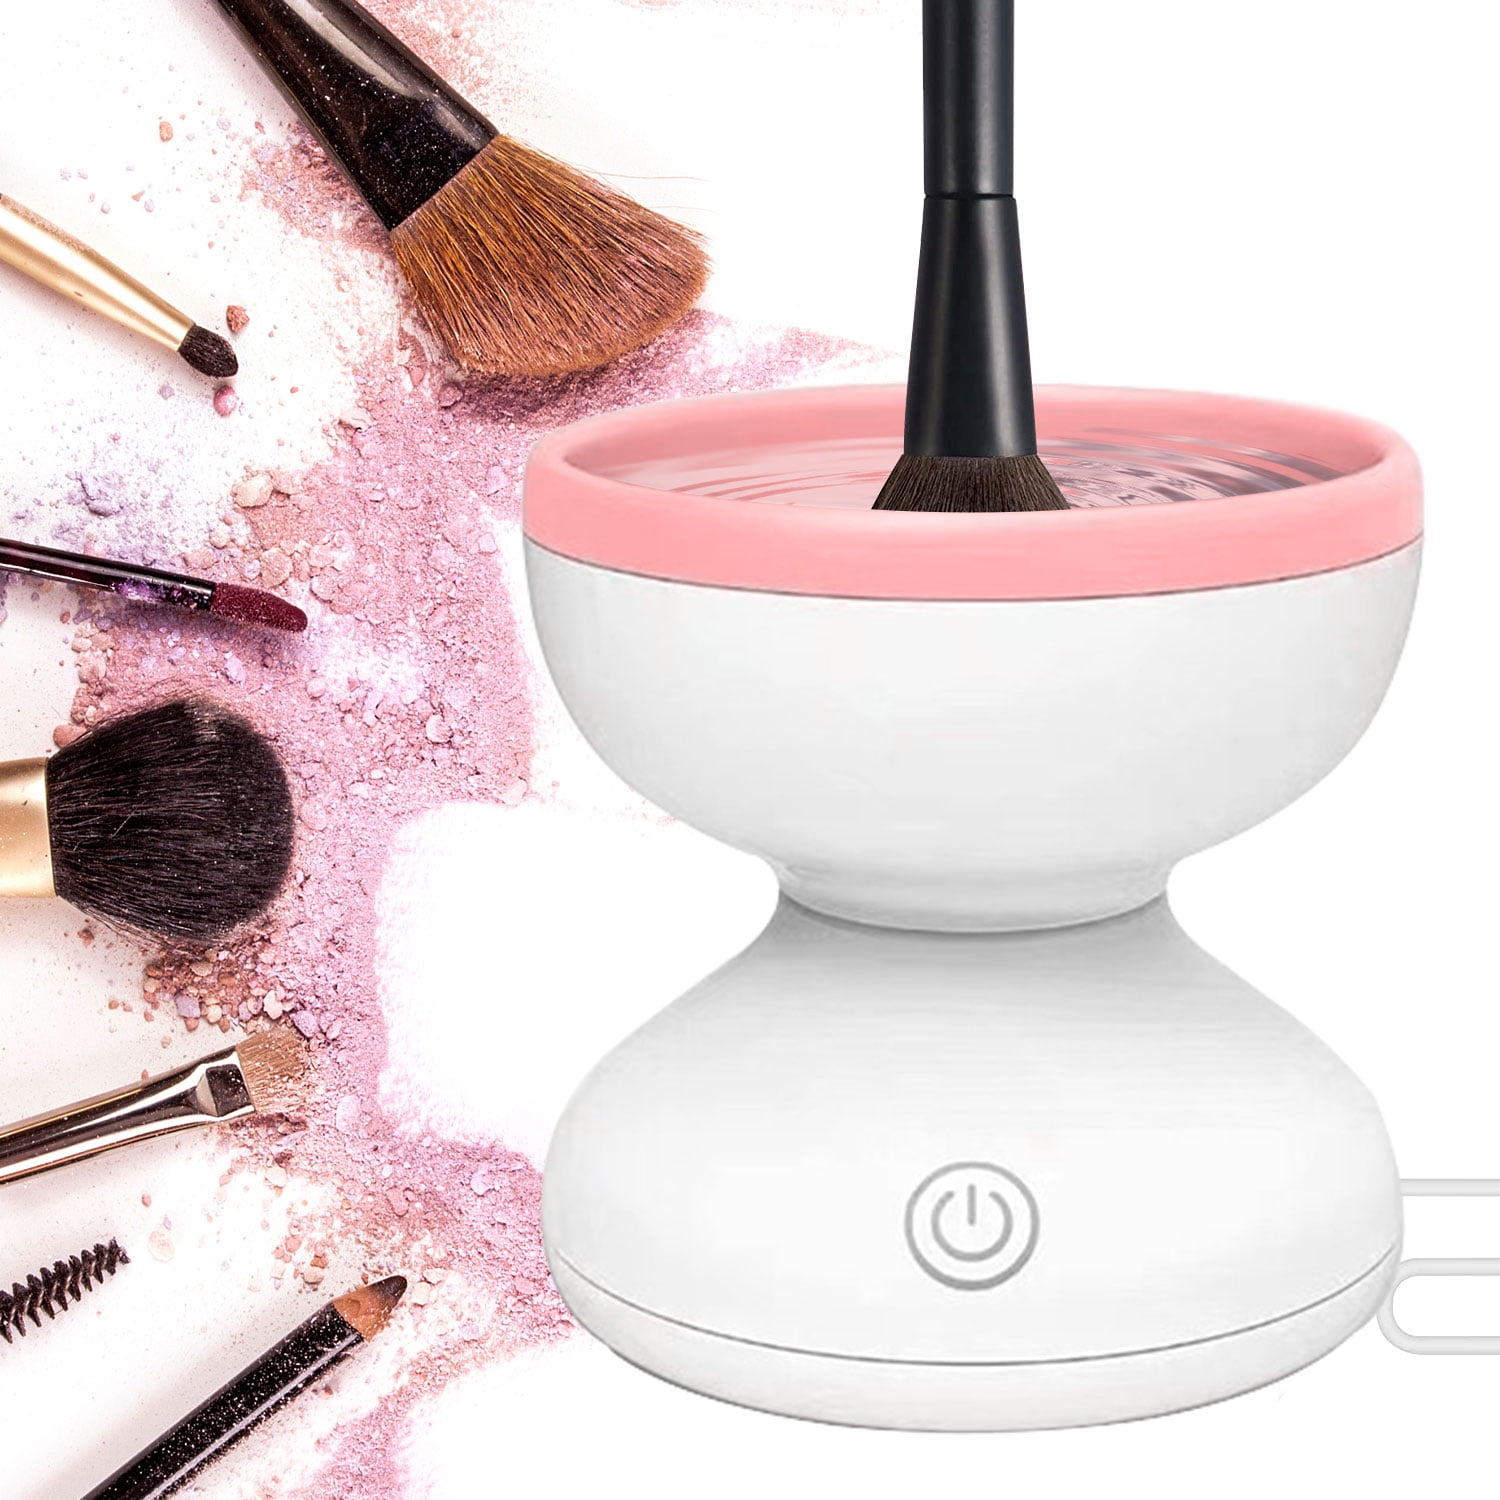 Brush Blender-Makeup Brush Cleaner - Automatic Electric Makeup Brush  Cleaner Machine-Fast and Effective Cleaning Solution for Brush Blender 